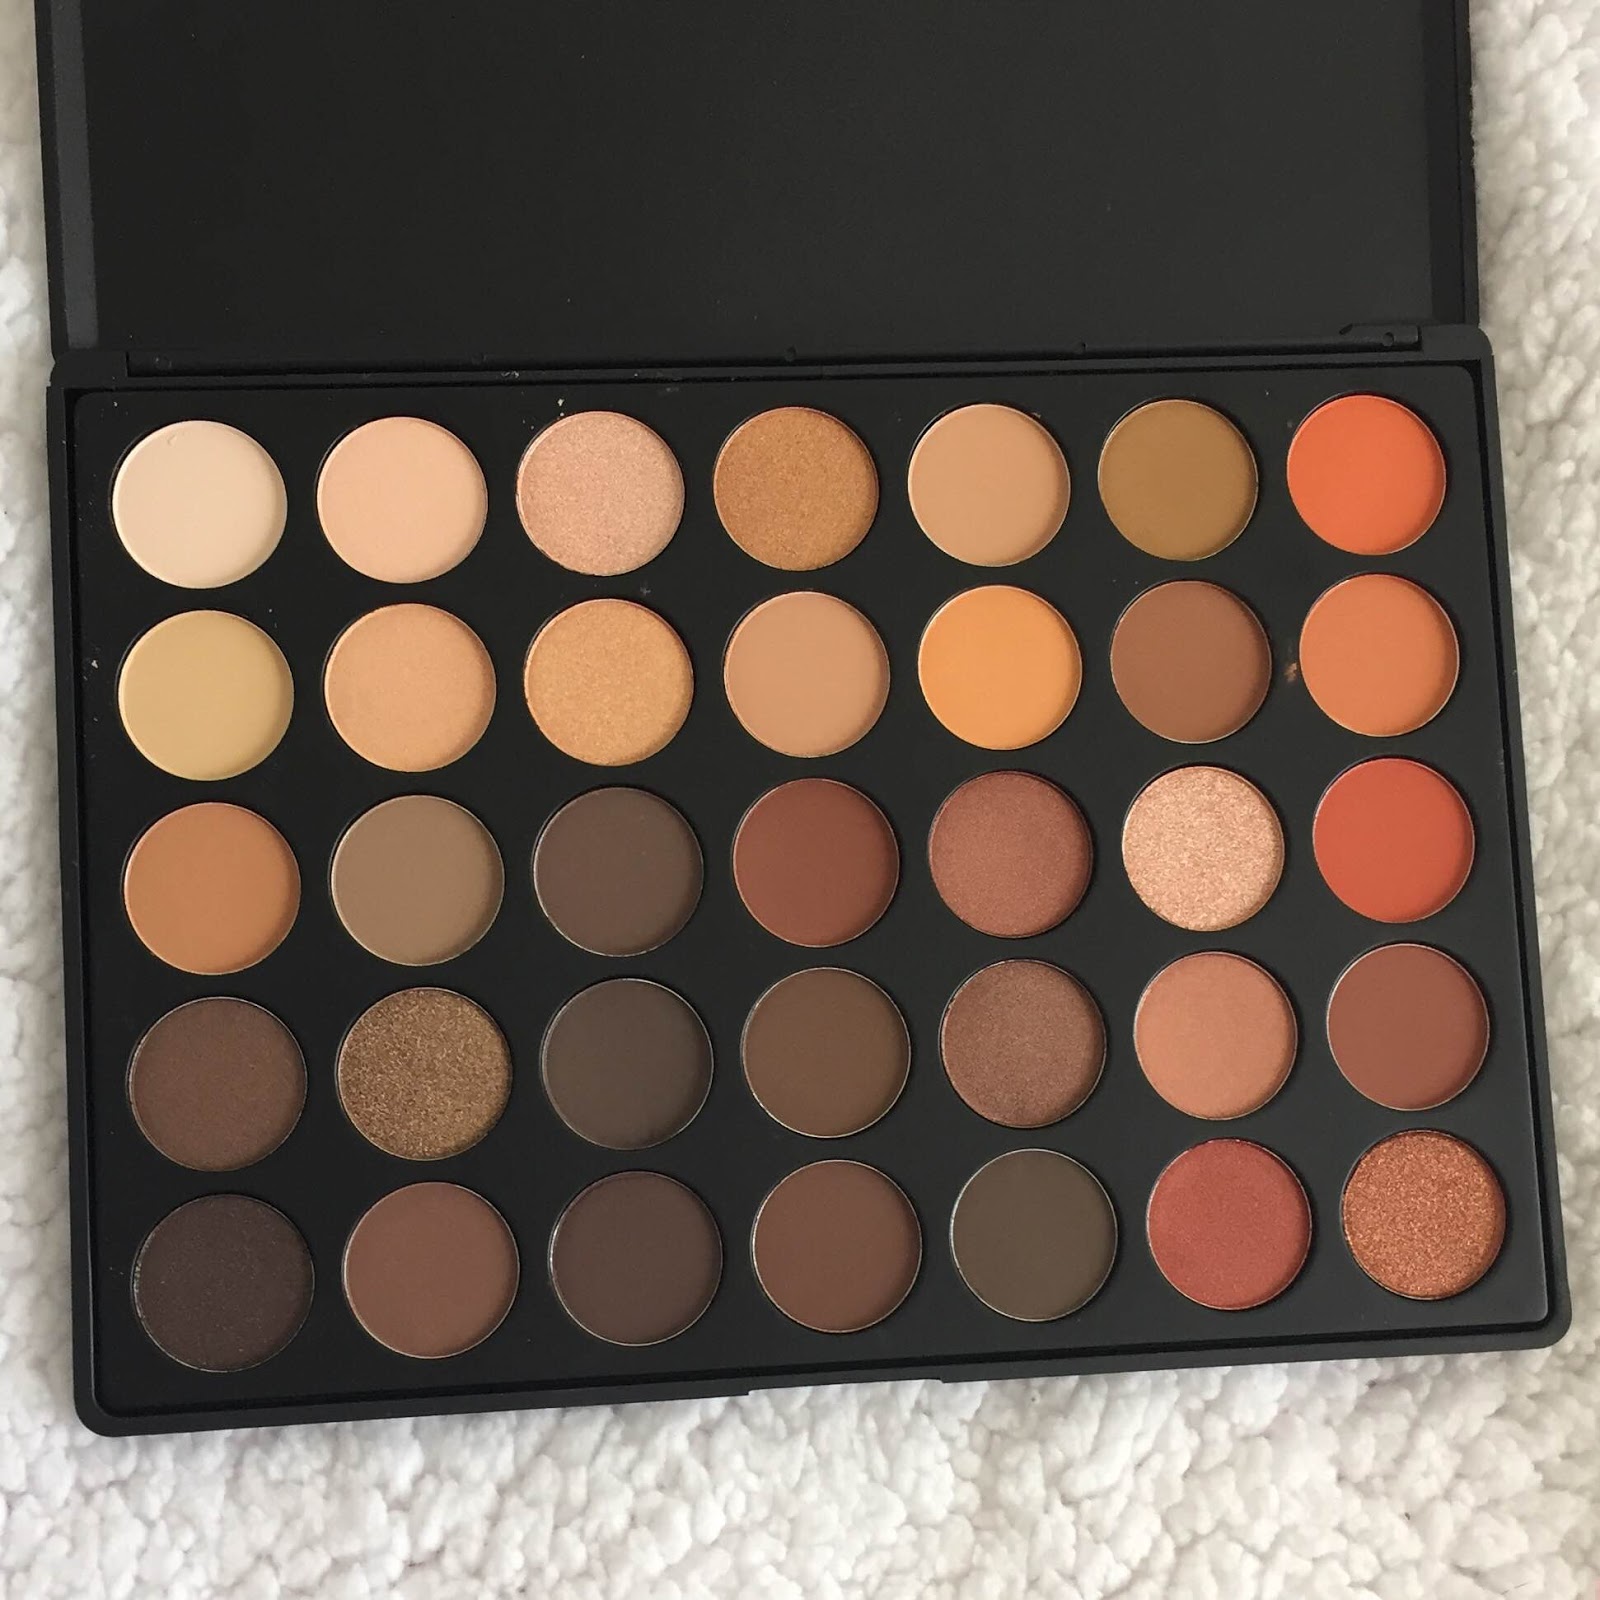 A Place For These Morphe 35O Palette Swatches on Dark Skin